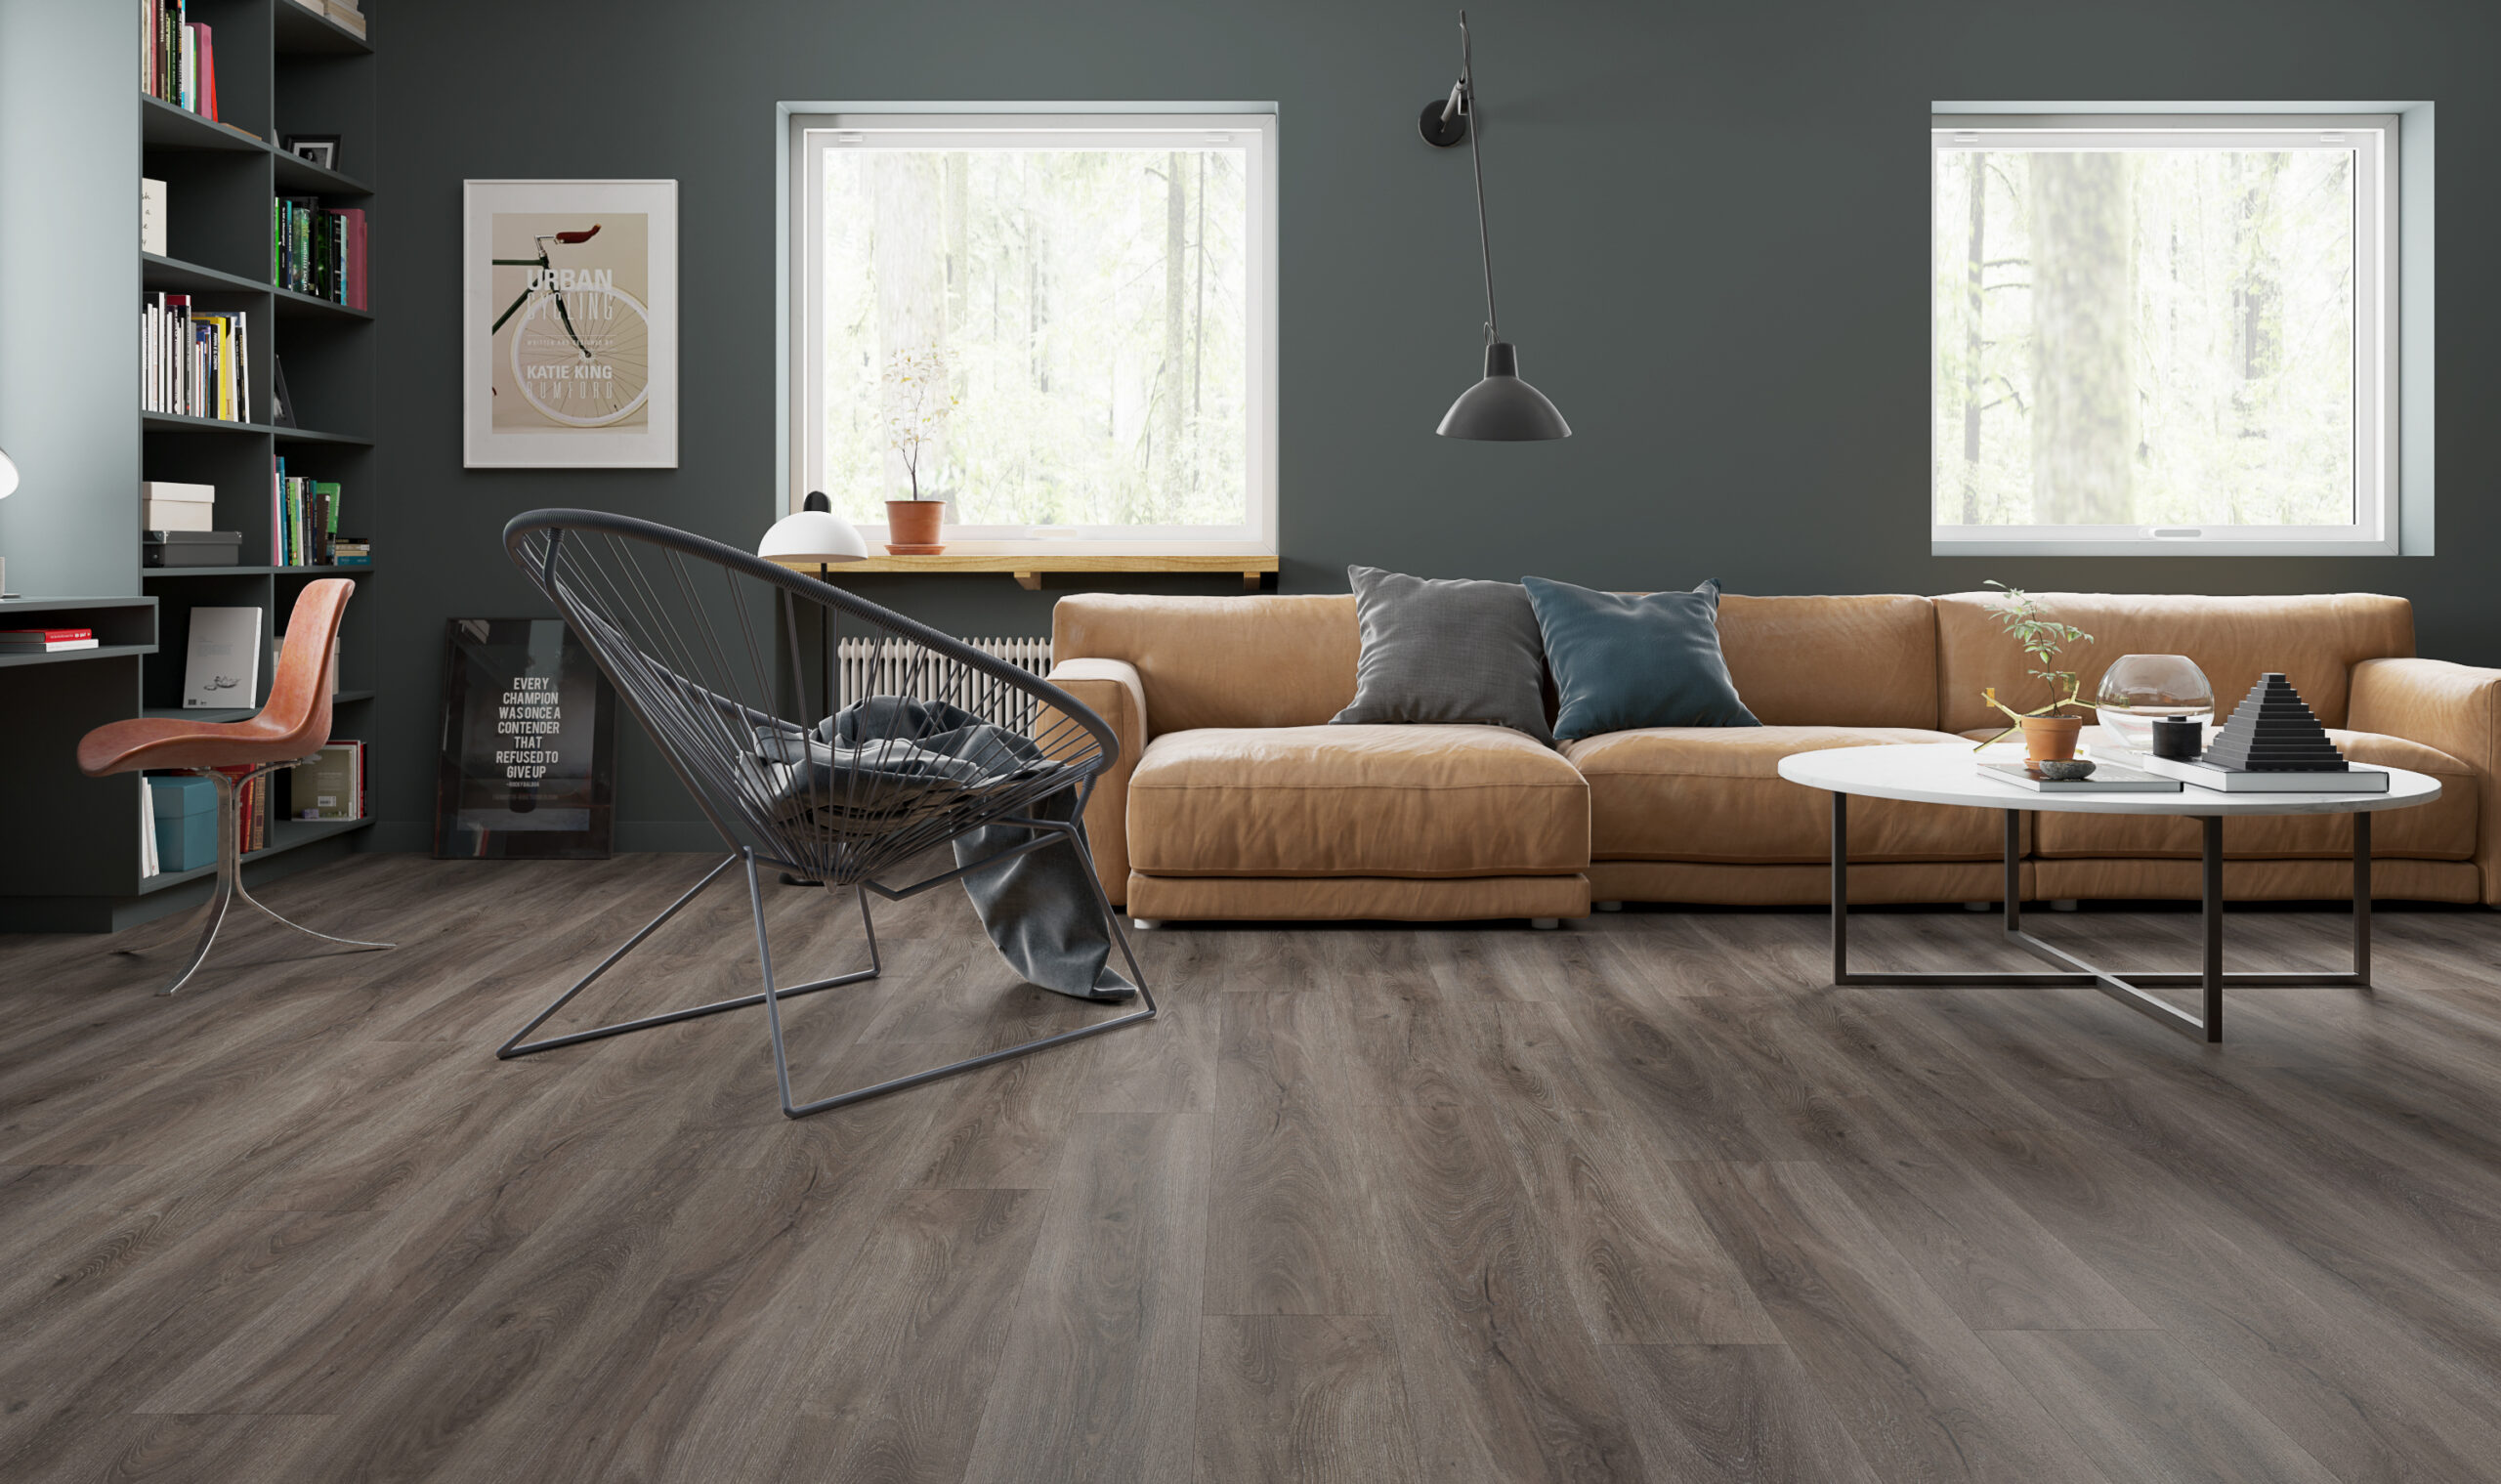 Proplus LVT Series- Color: Coast Line 7" × 48" - Micro Bevel Standard Emboss 7x48 in. planks, 4.2 mm thickness 12mm wearlayer locking system